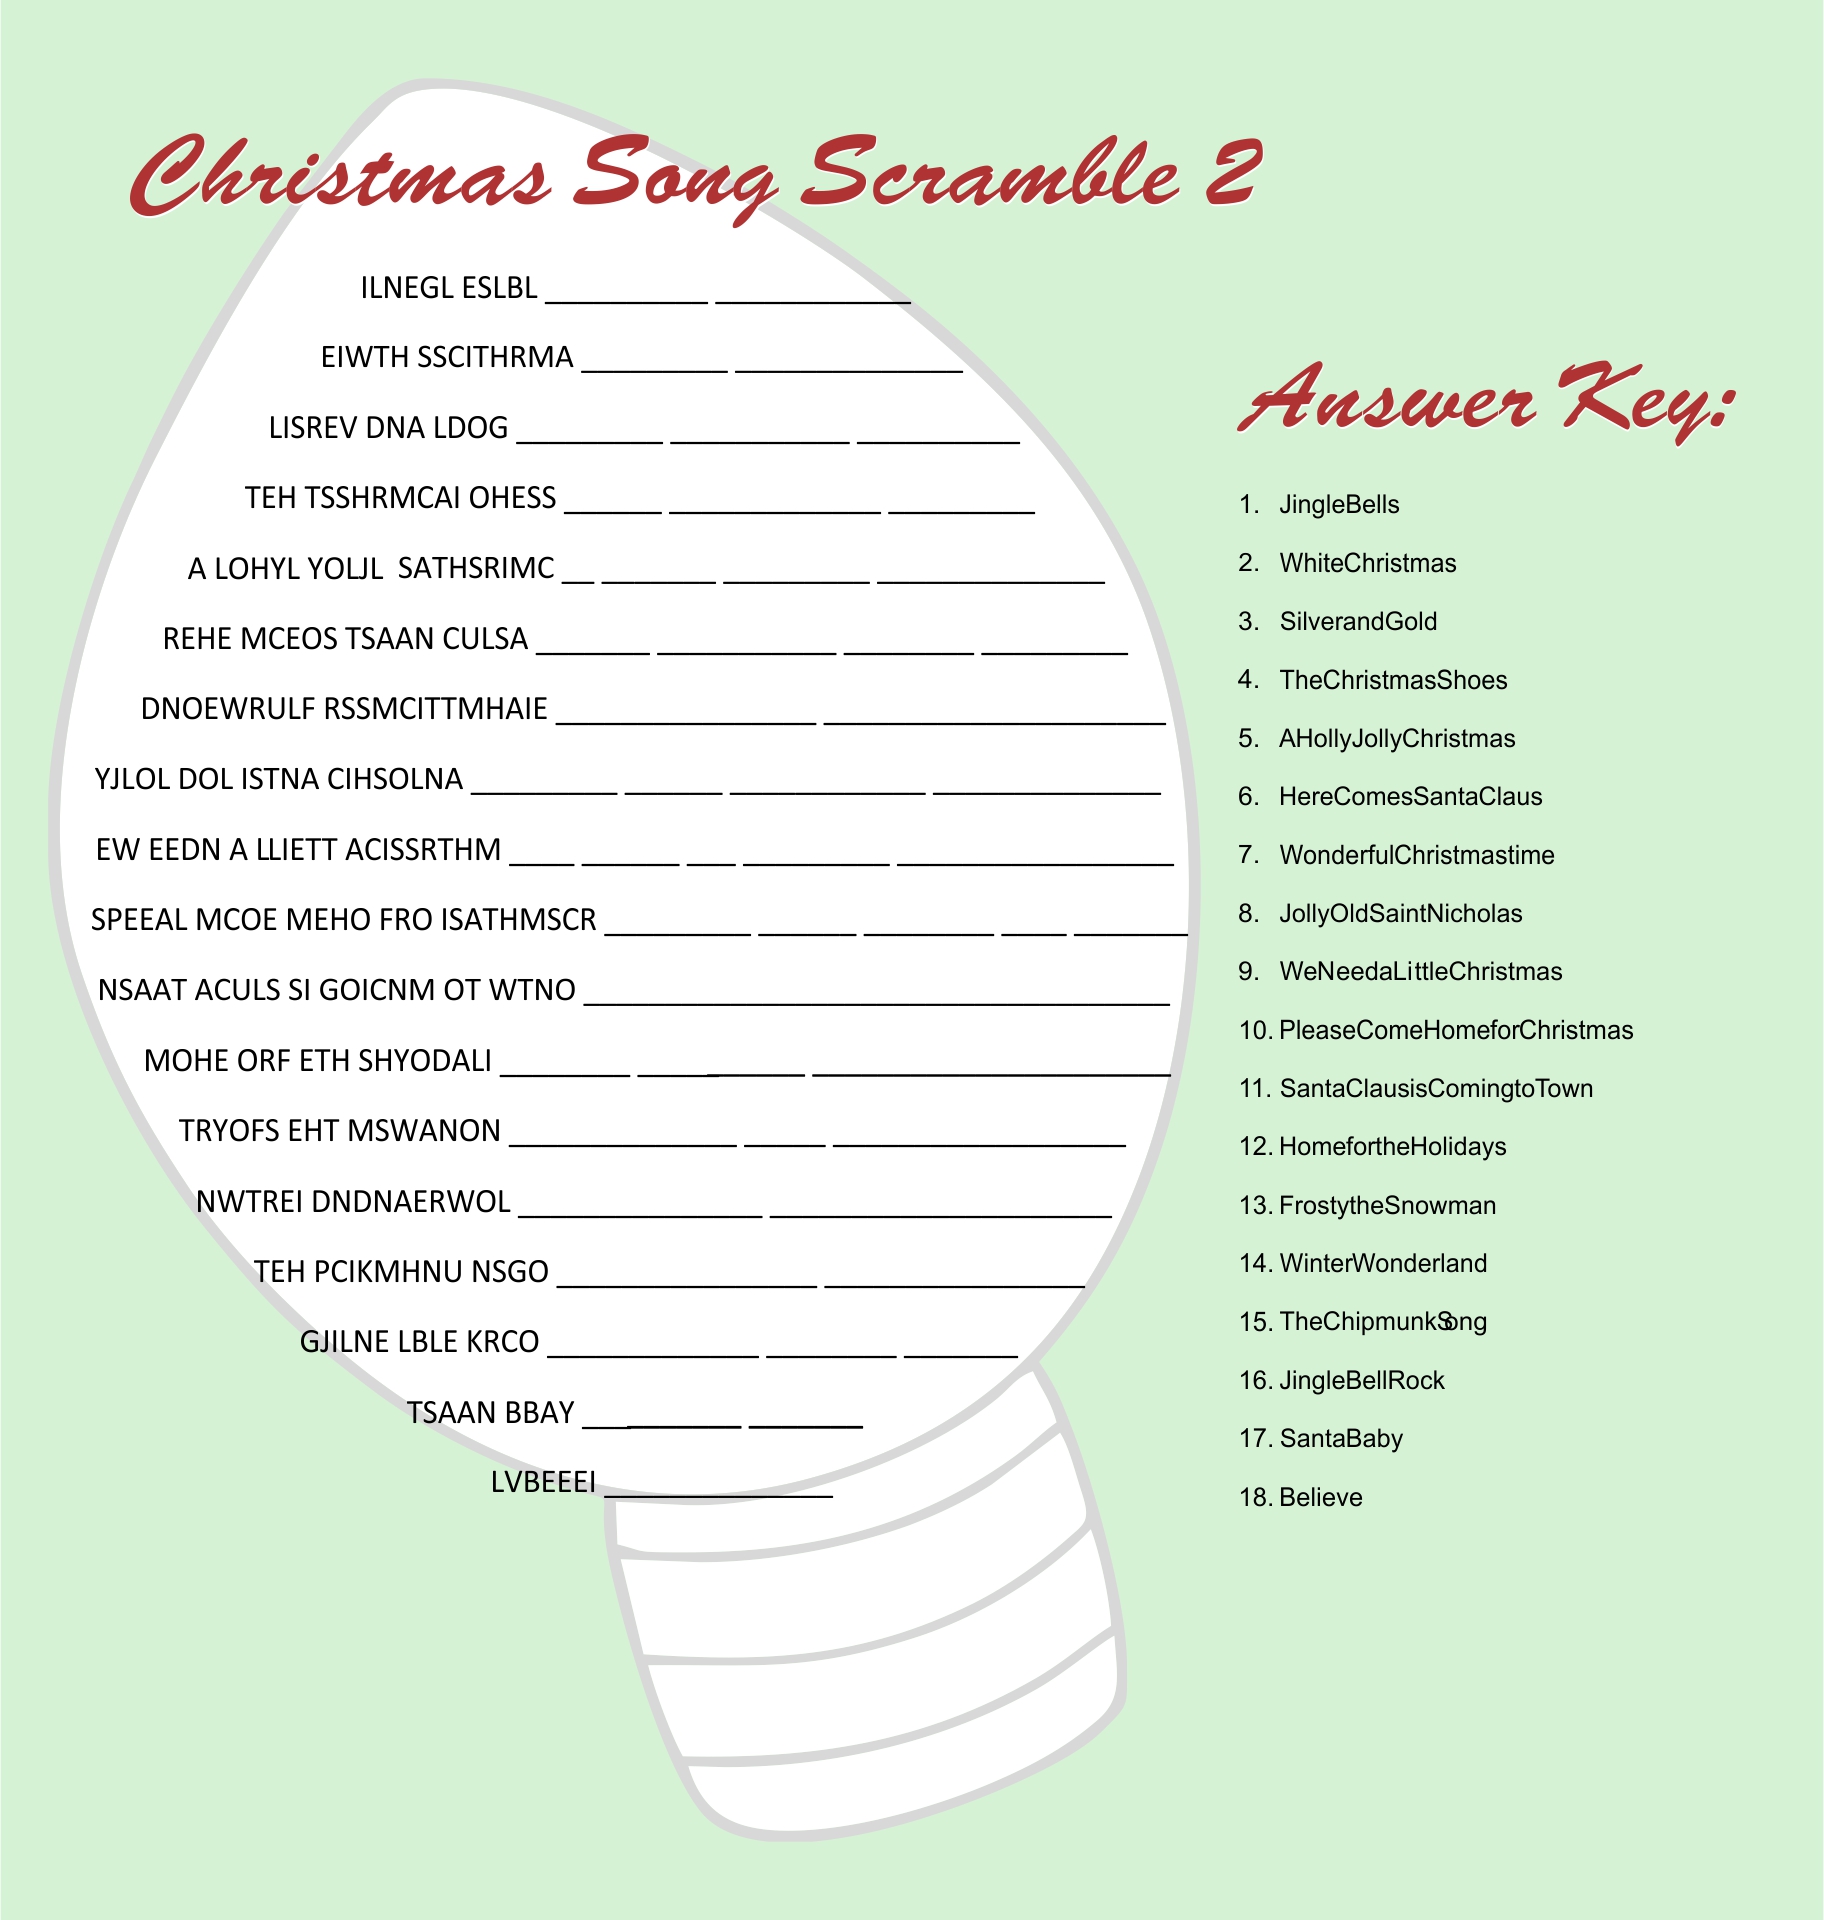 6 Best Images of Printable Christmas Song Scramble 2 Christmas Song